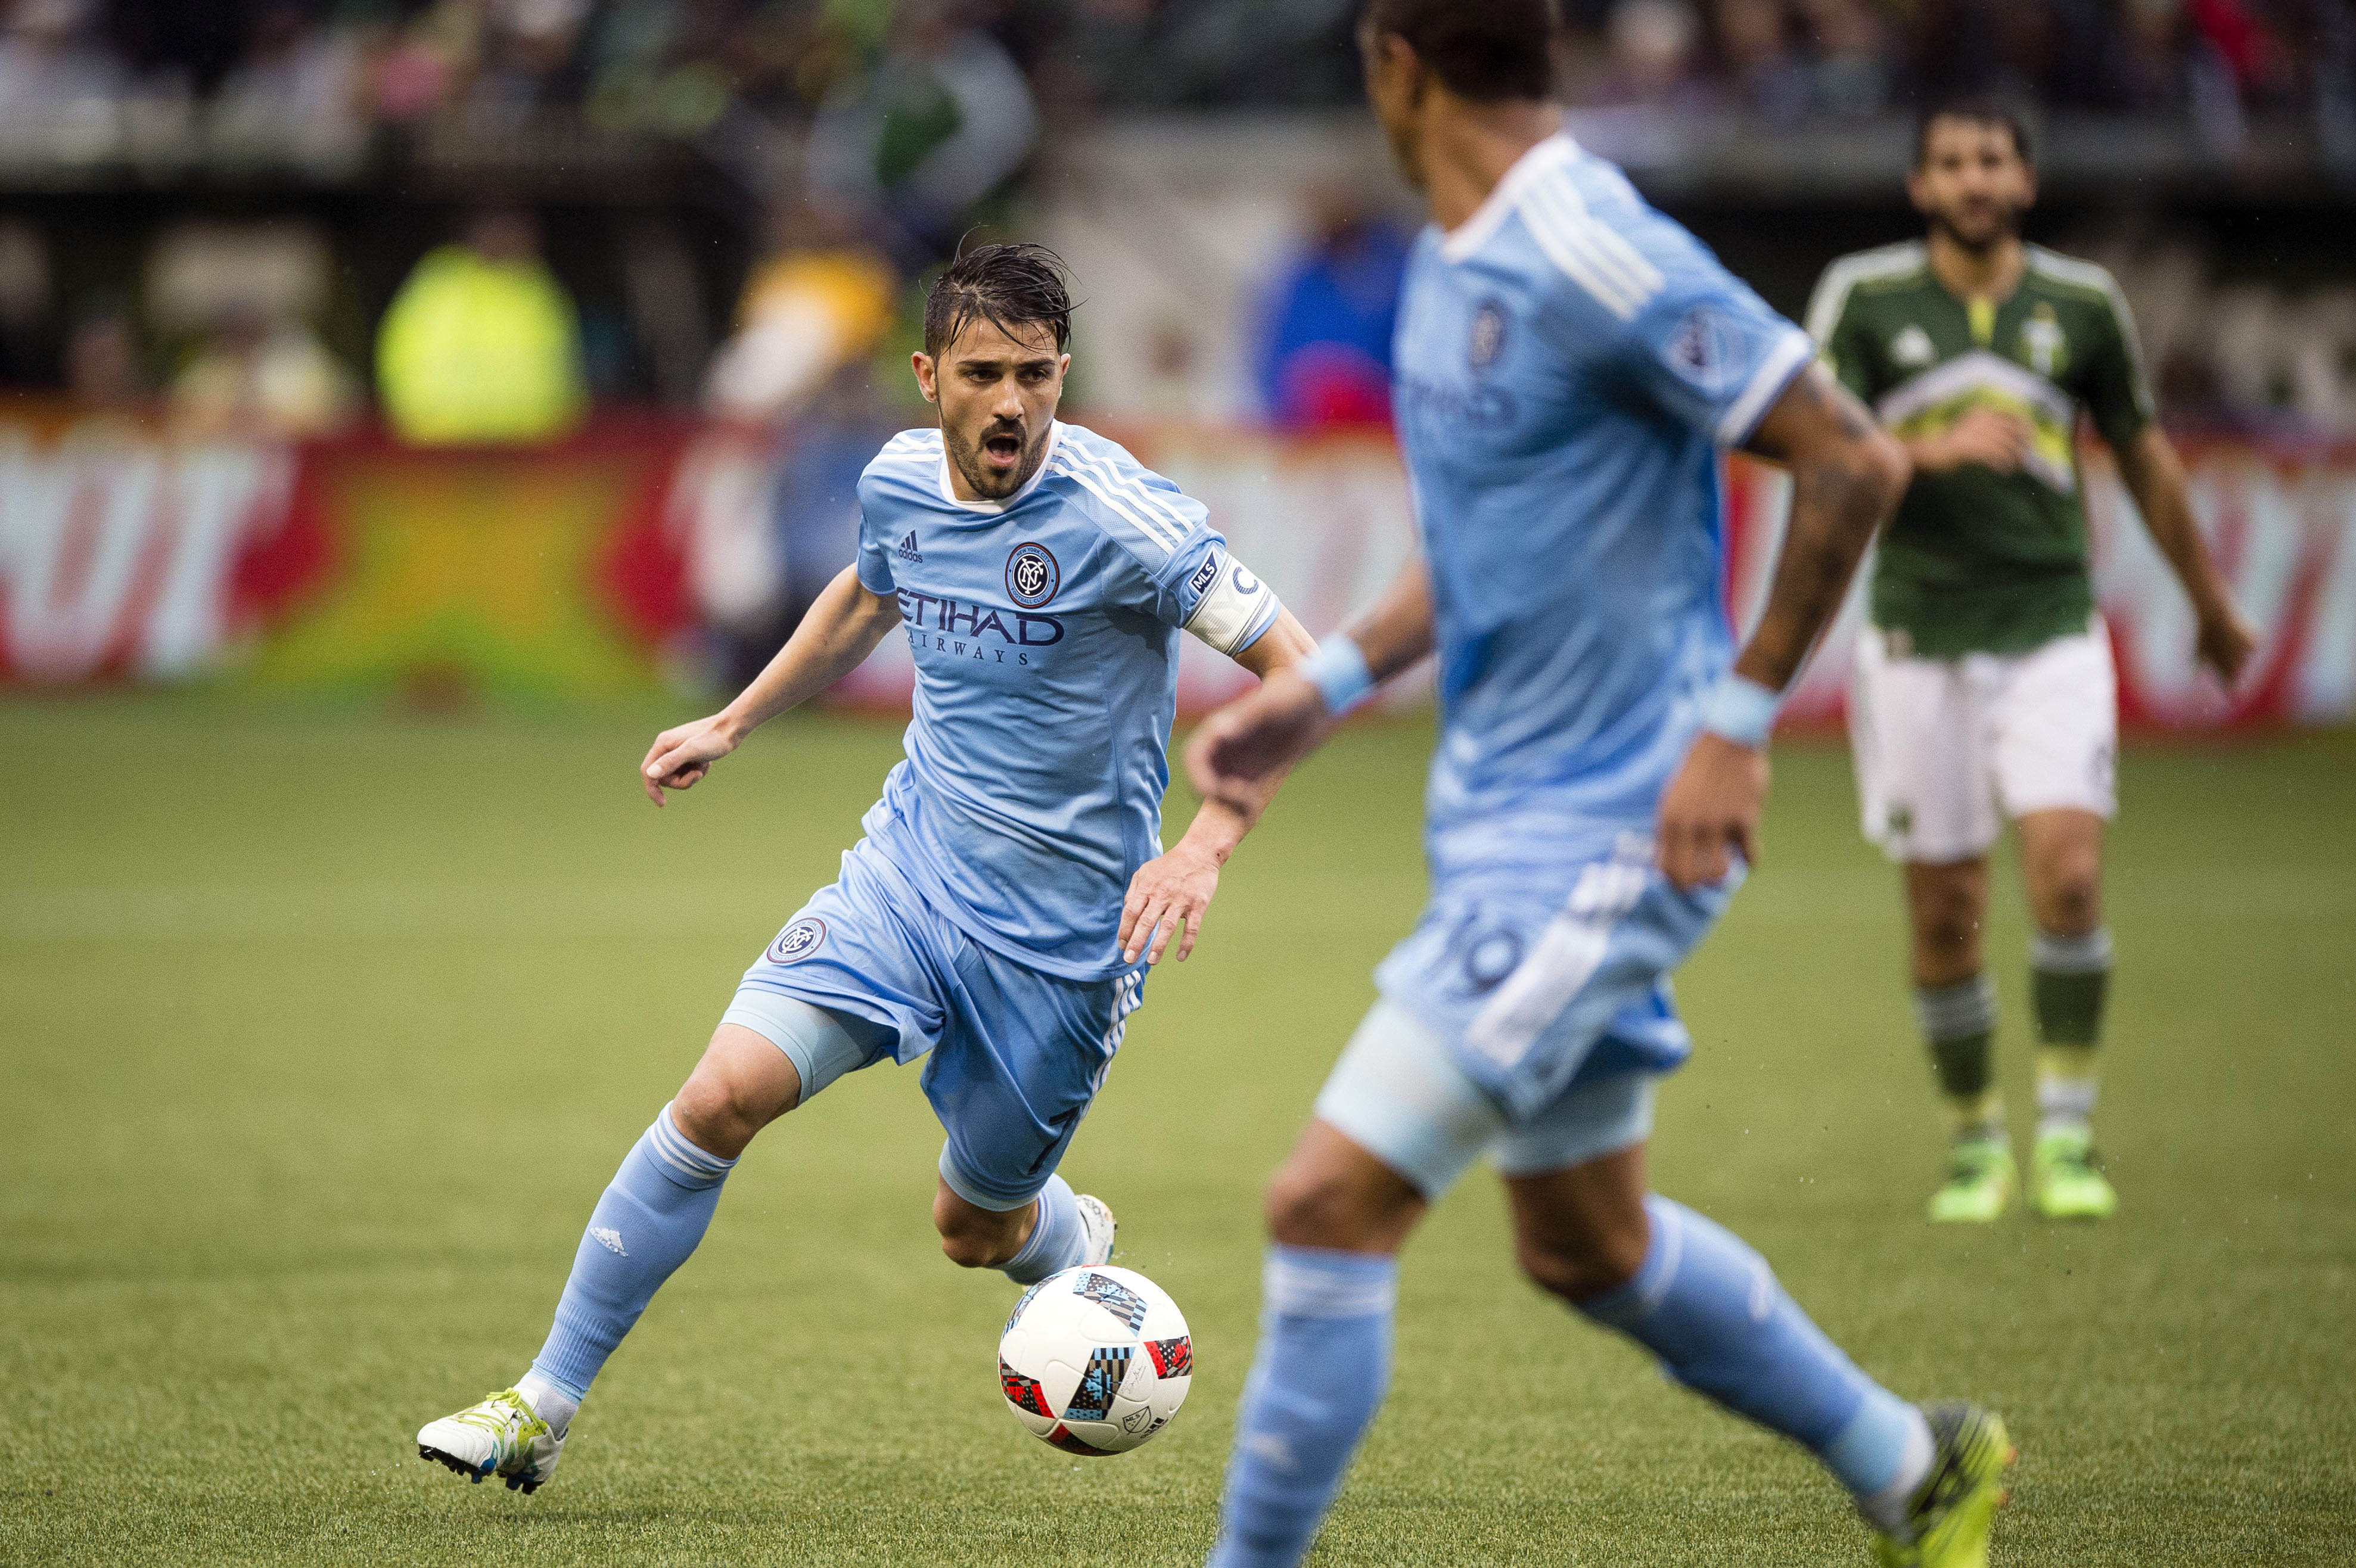 May 15, 2016; Portland, OR, USA; New York City FC forward David Villa (7) takes the ball up field during the second half against the Portland Timbers at Providence Park. New York FC won 2-1. Mandatory Credit: Troy Wayrynen-USA TODAY Sports